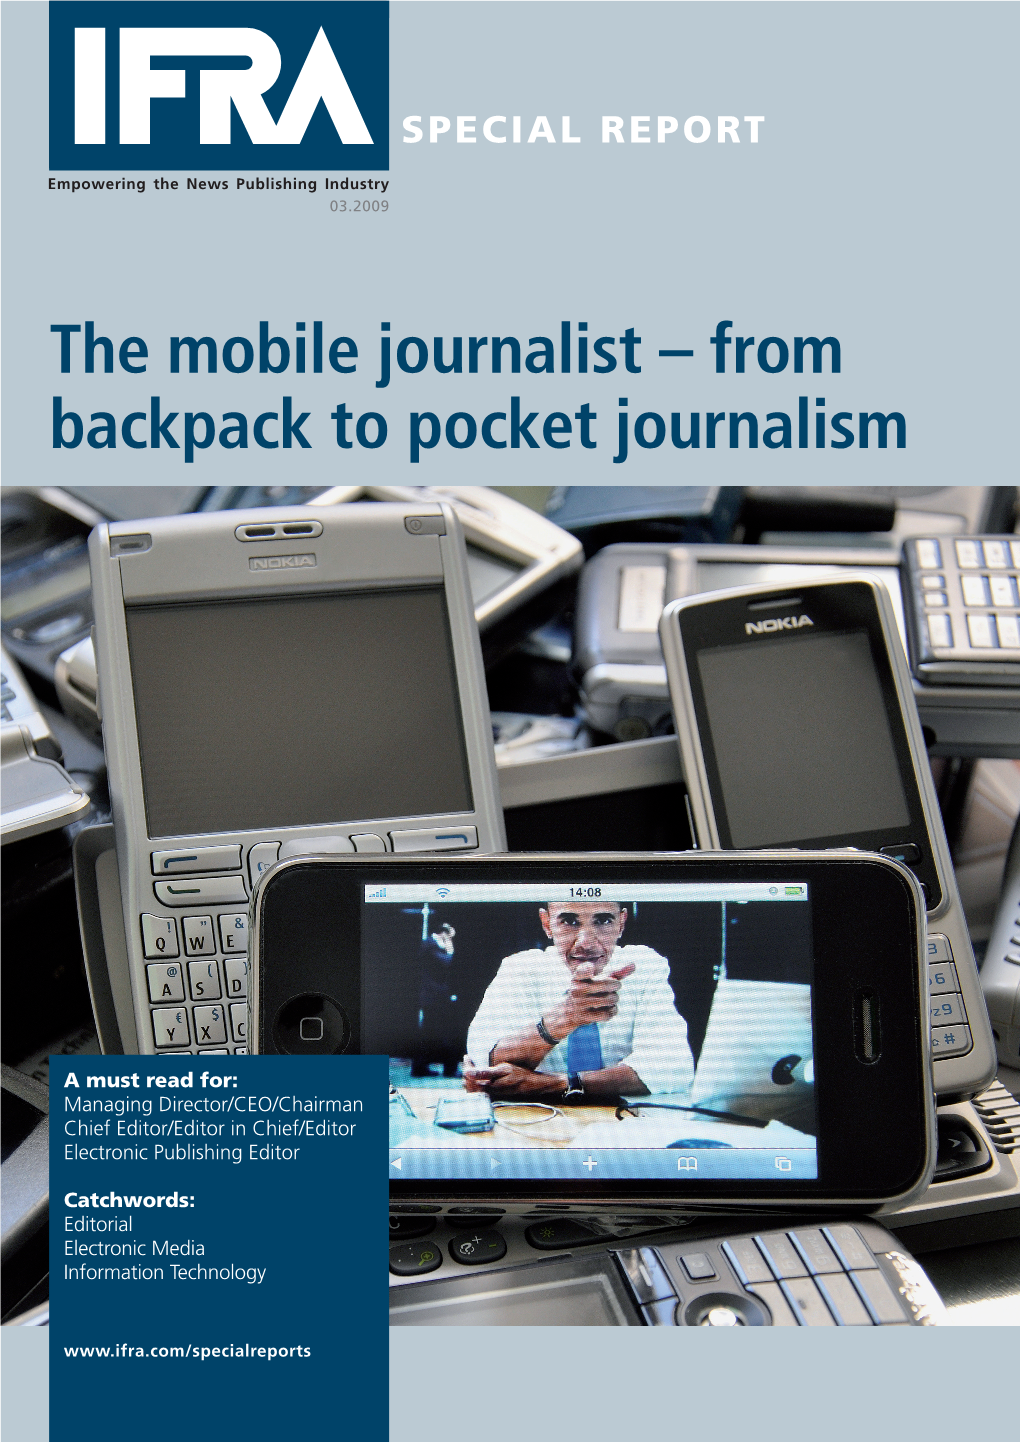 The Mobile Journalist – from Backpack to Pocket Journalism